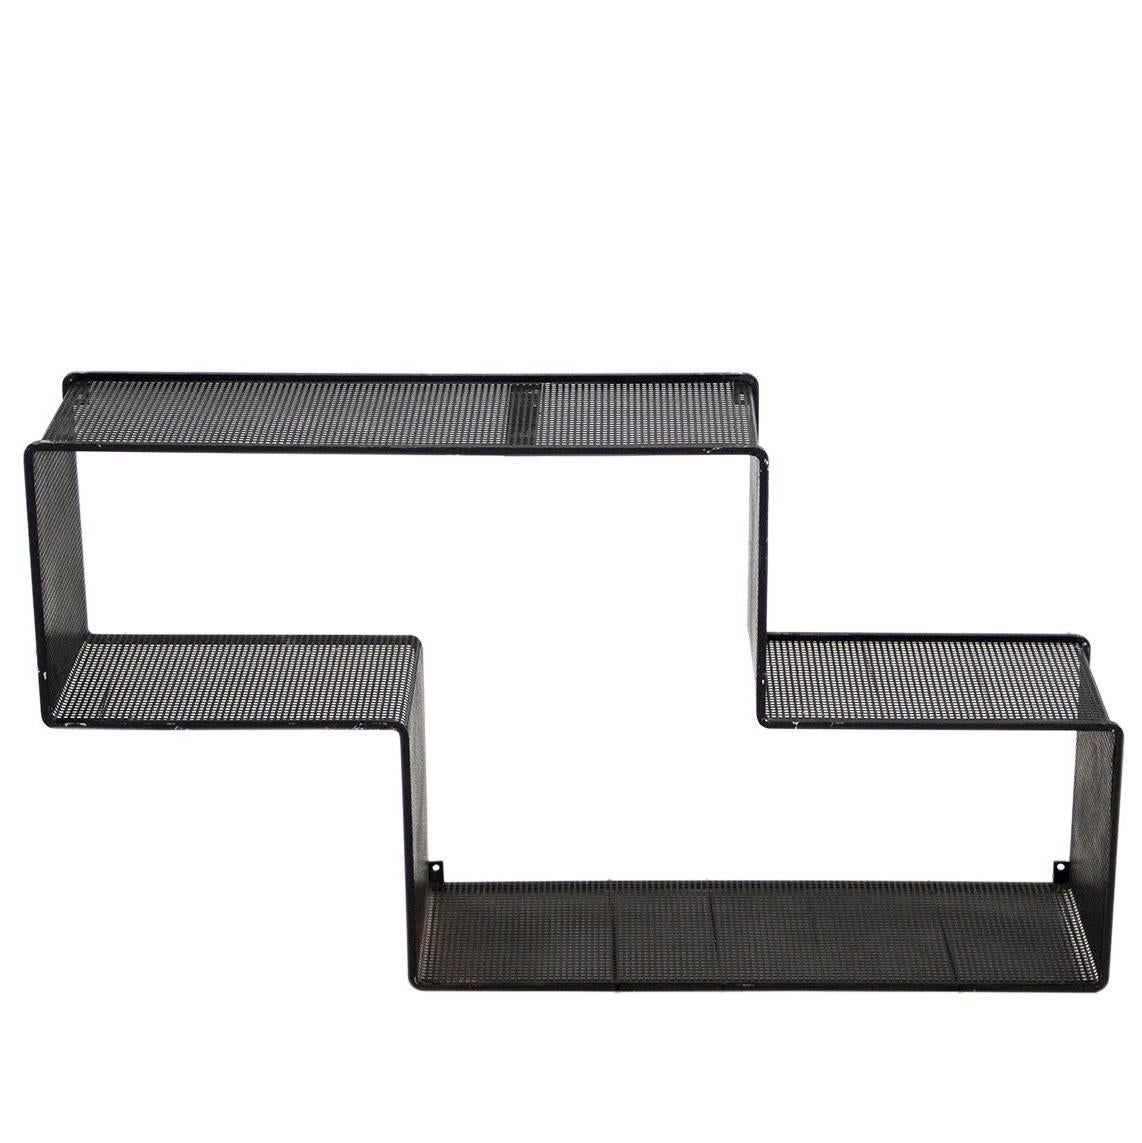 Black Dedal Wall Shelf by Mathieu Mategot, Perforated Steel, circa 1950, France For Sale